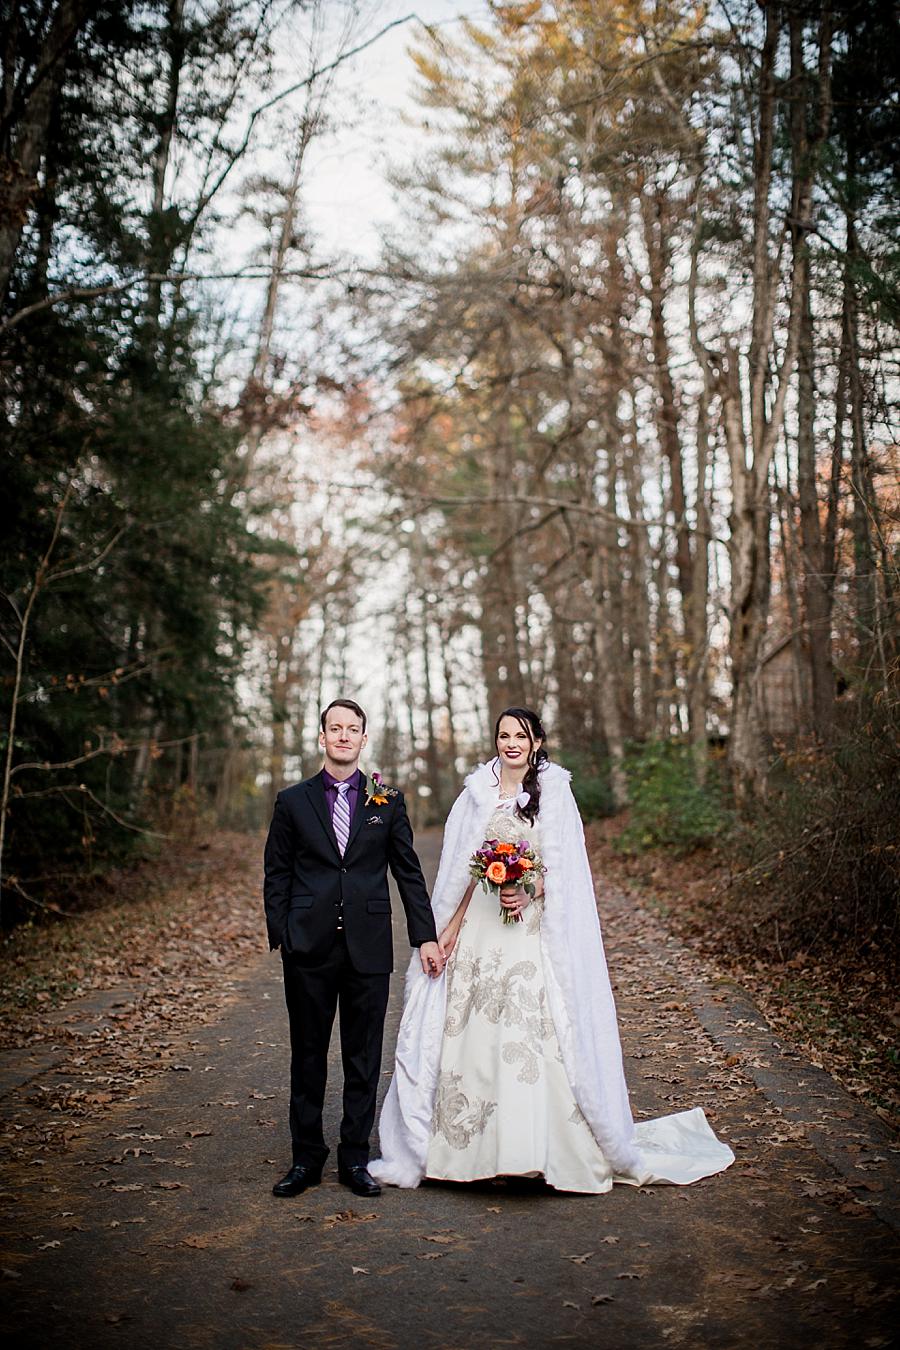 Holding hands facing the camera at this Cumberland Mountain State Park wedding by Knoxville Wedding Photographer, Amanda May Photos.